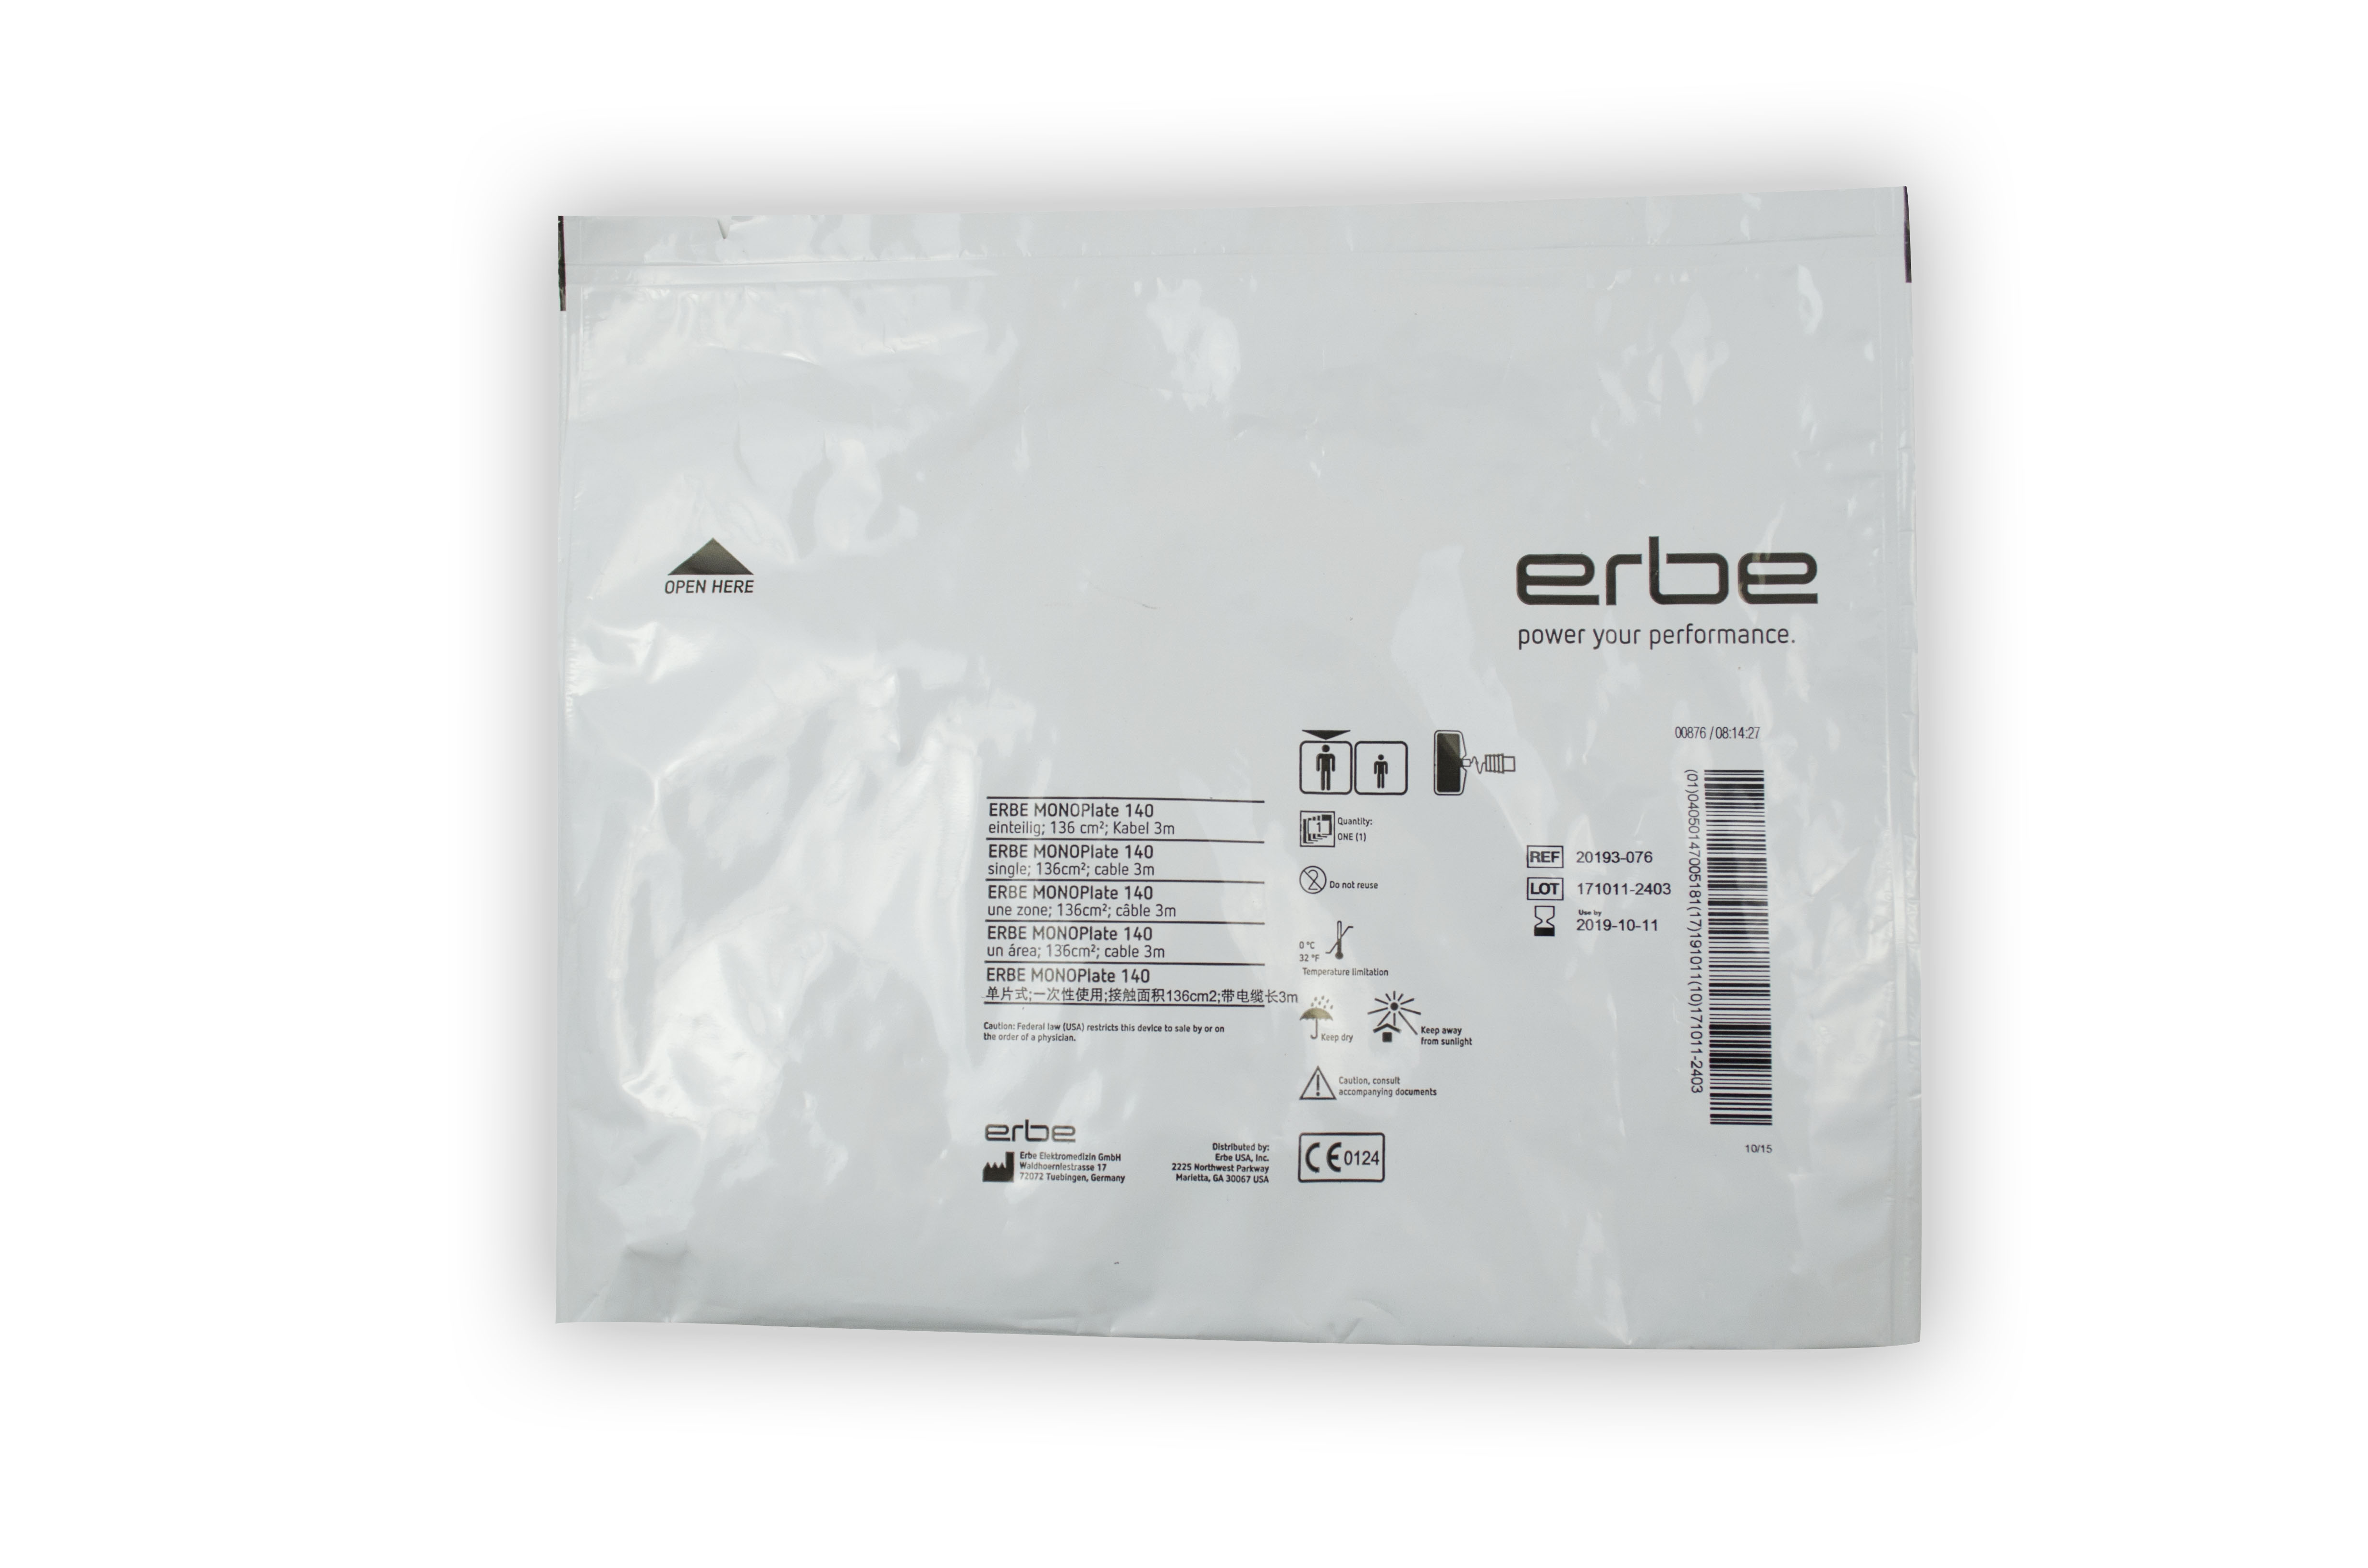 [Out-of-Date] Olympus Disposable ERBE Monoplate 140 - 20193-076 (Original Packaging)